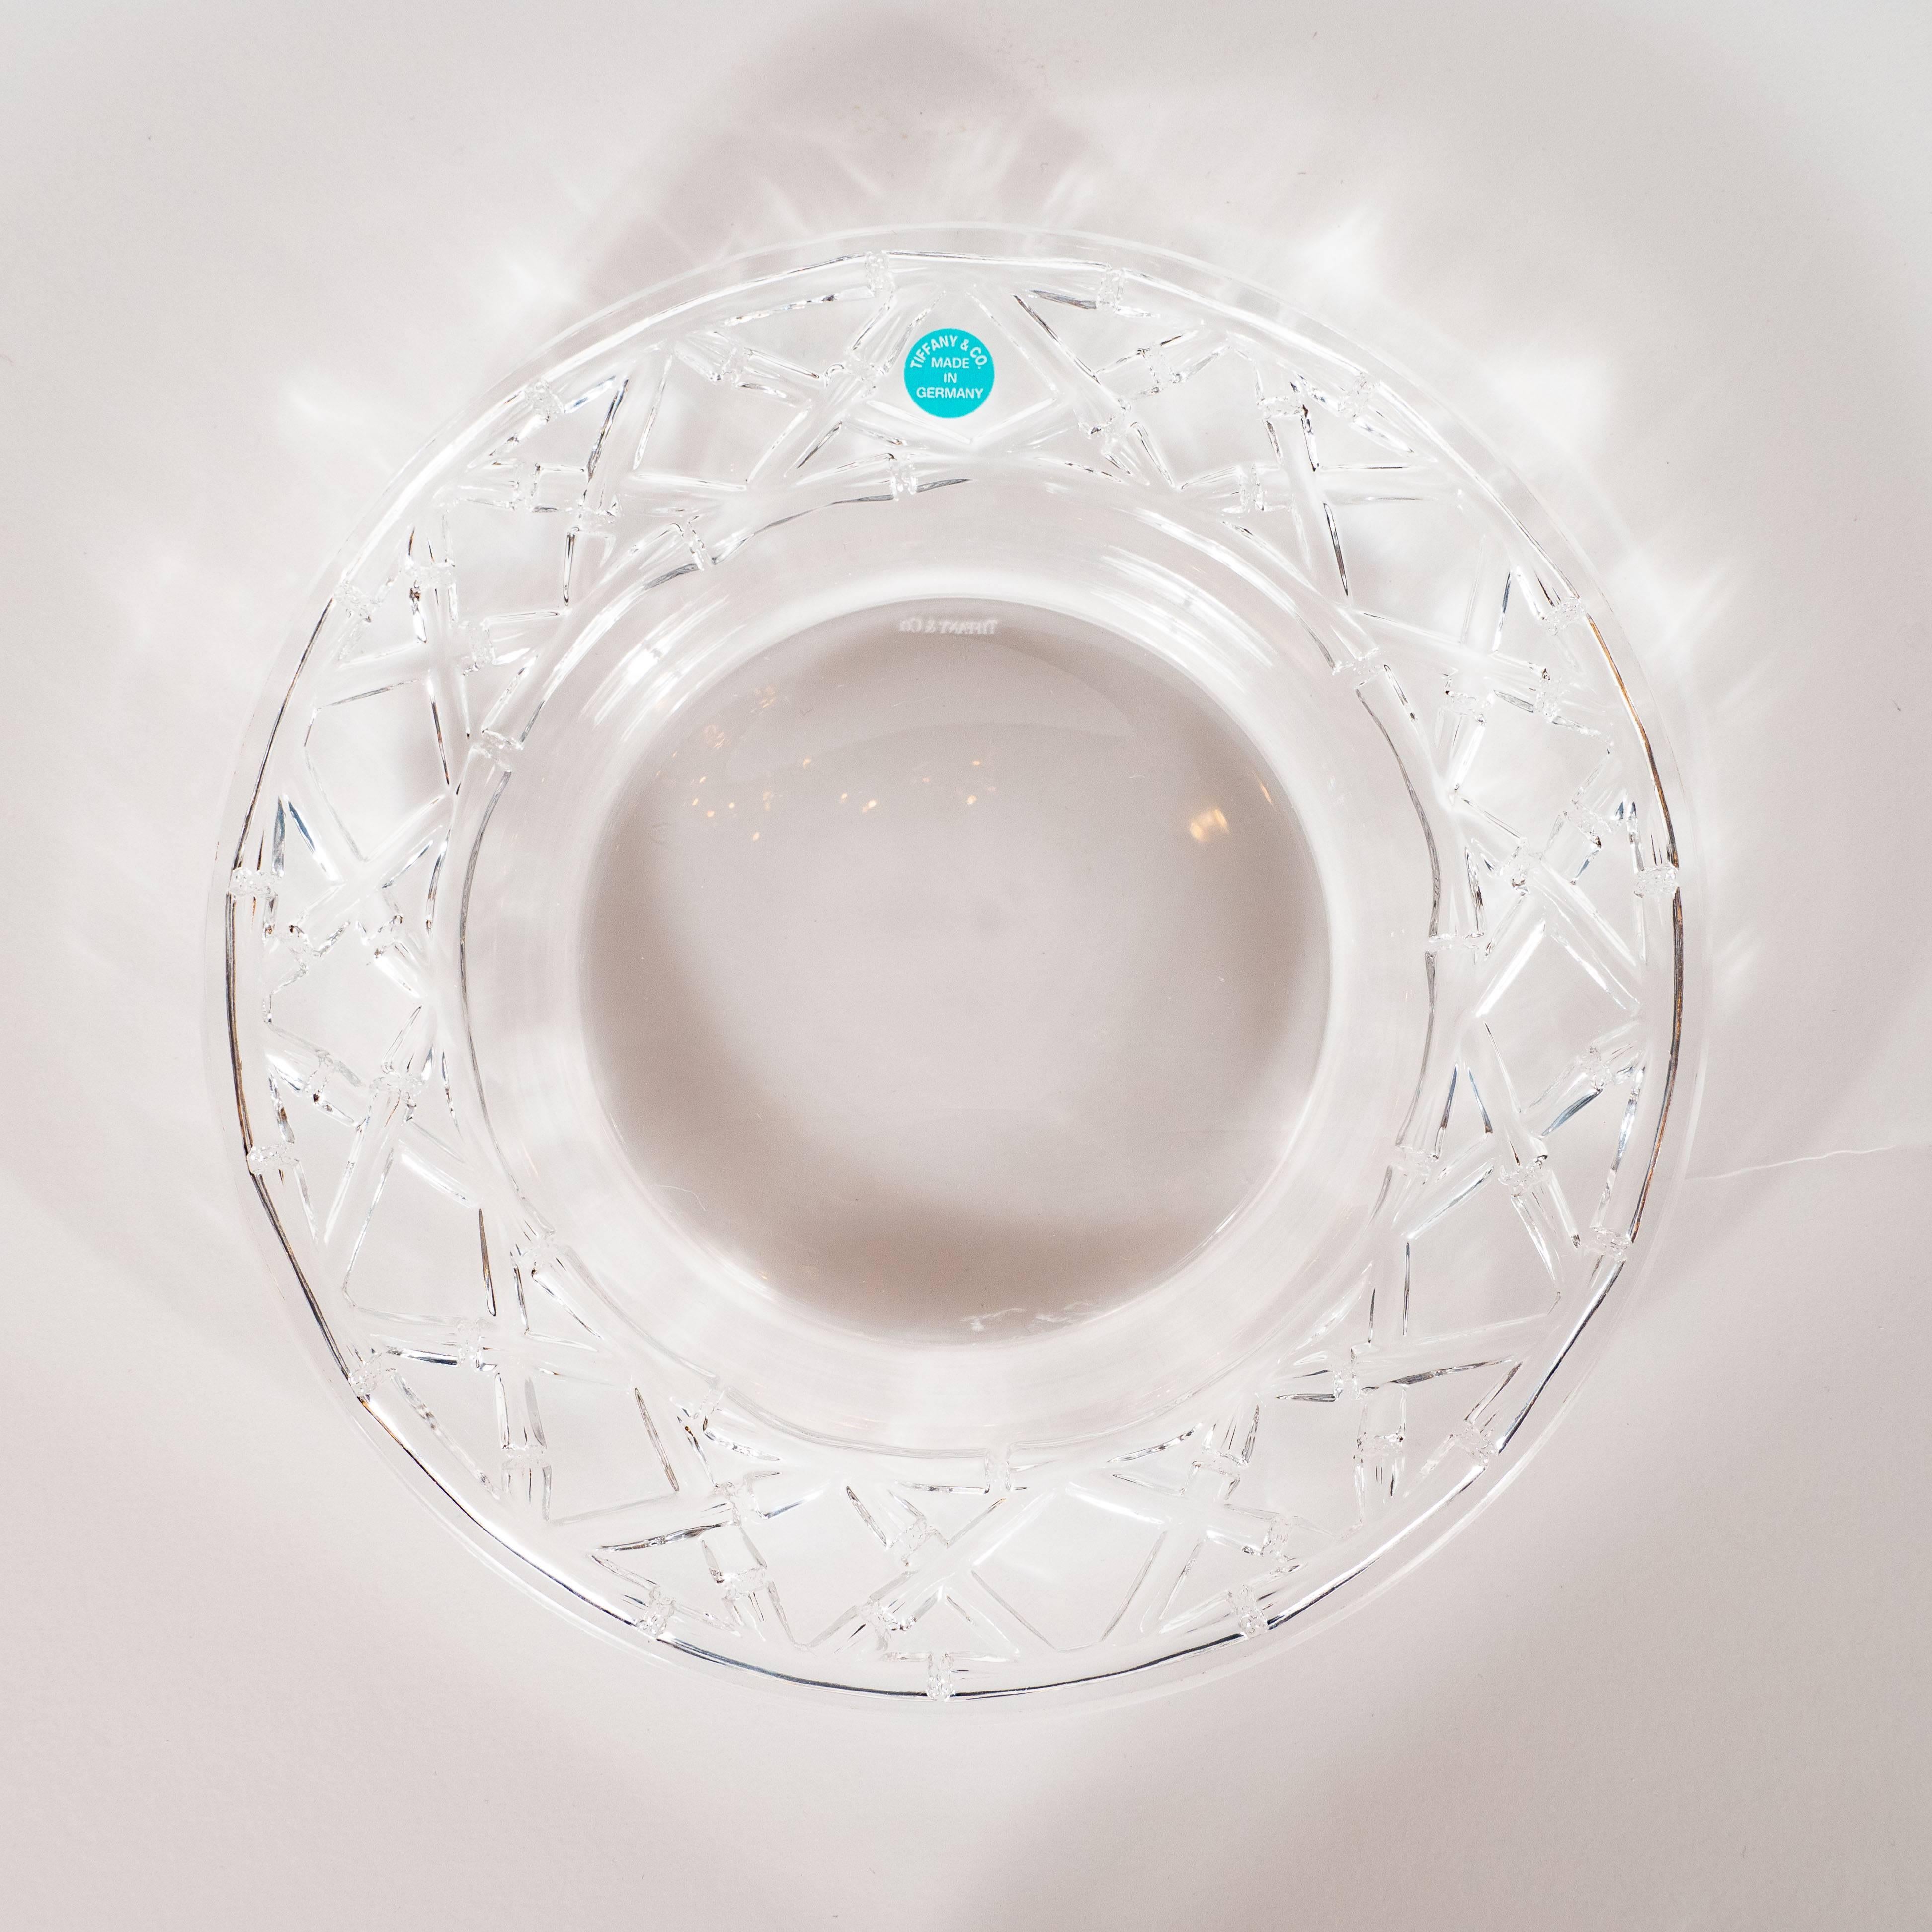 This stunning set of four Dessert/Hors D'oeuvres plates were designed by the fabled American maker- Tiffany & Co. and custom crafted in Germany. They feature a basketweave pattern etched into the bottom of the outer ring of each plate, resembling